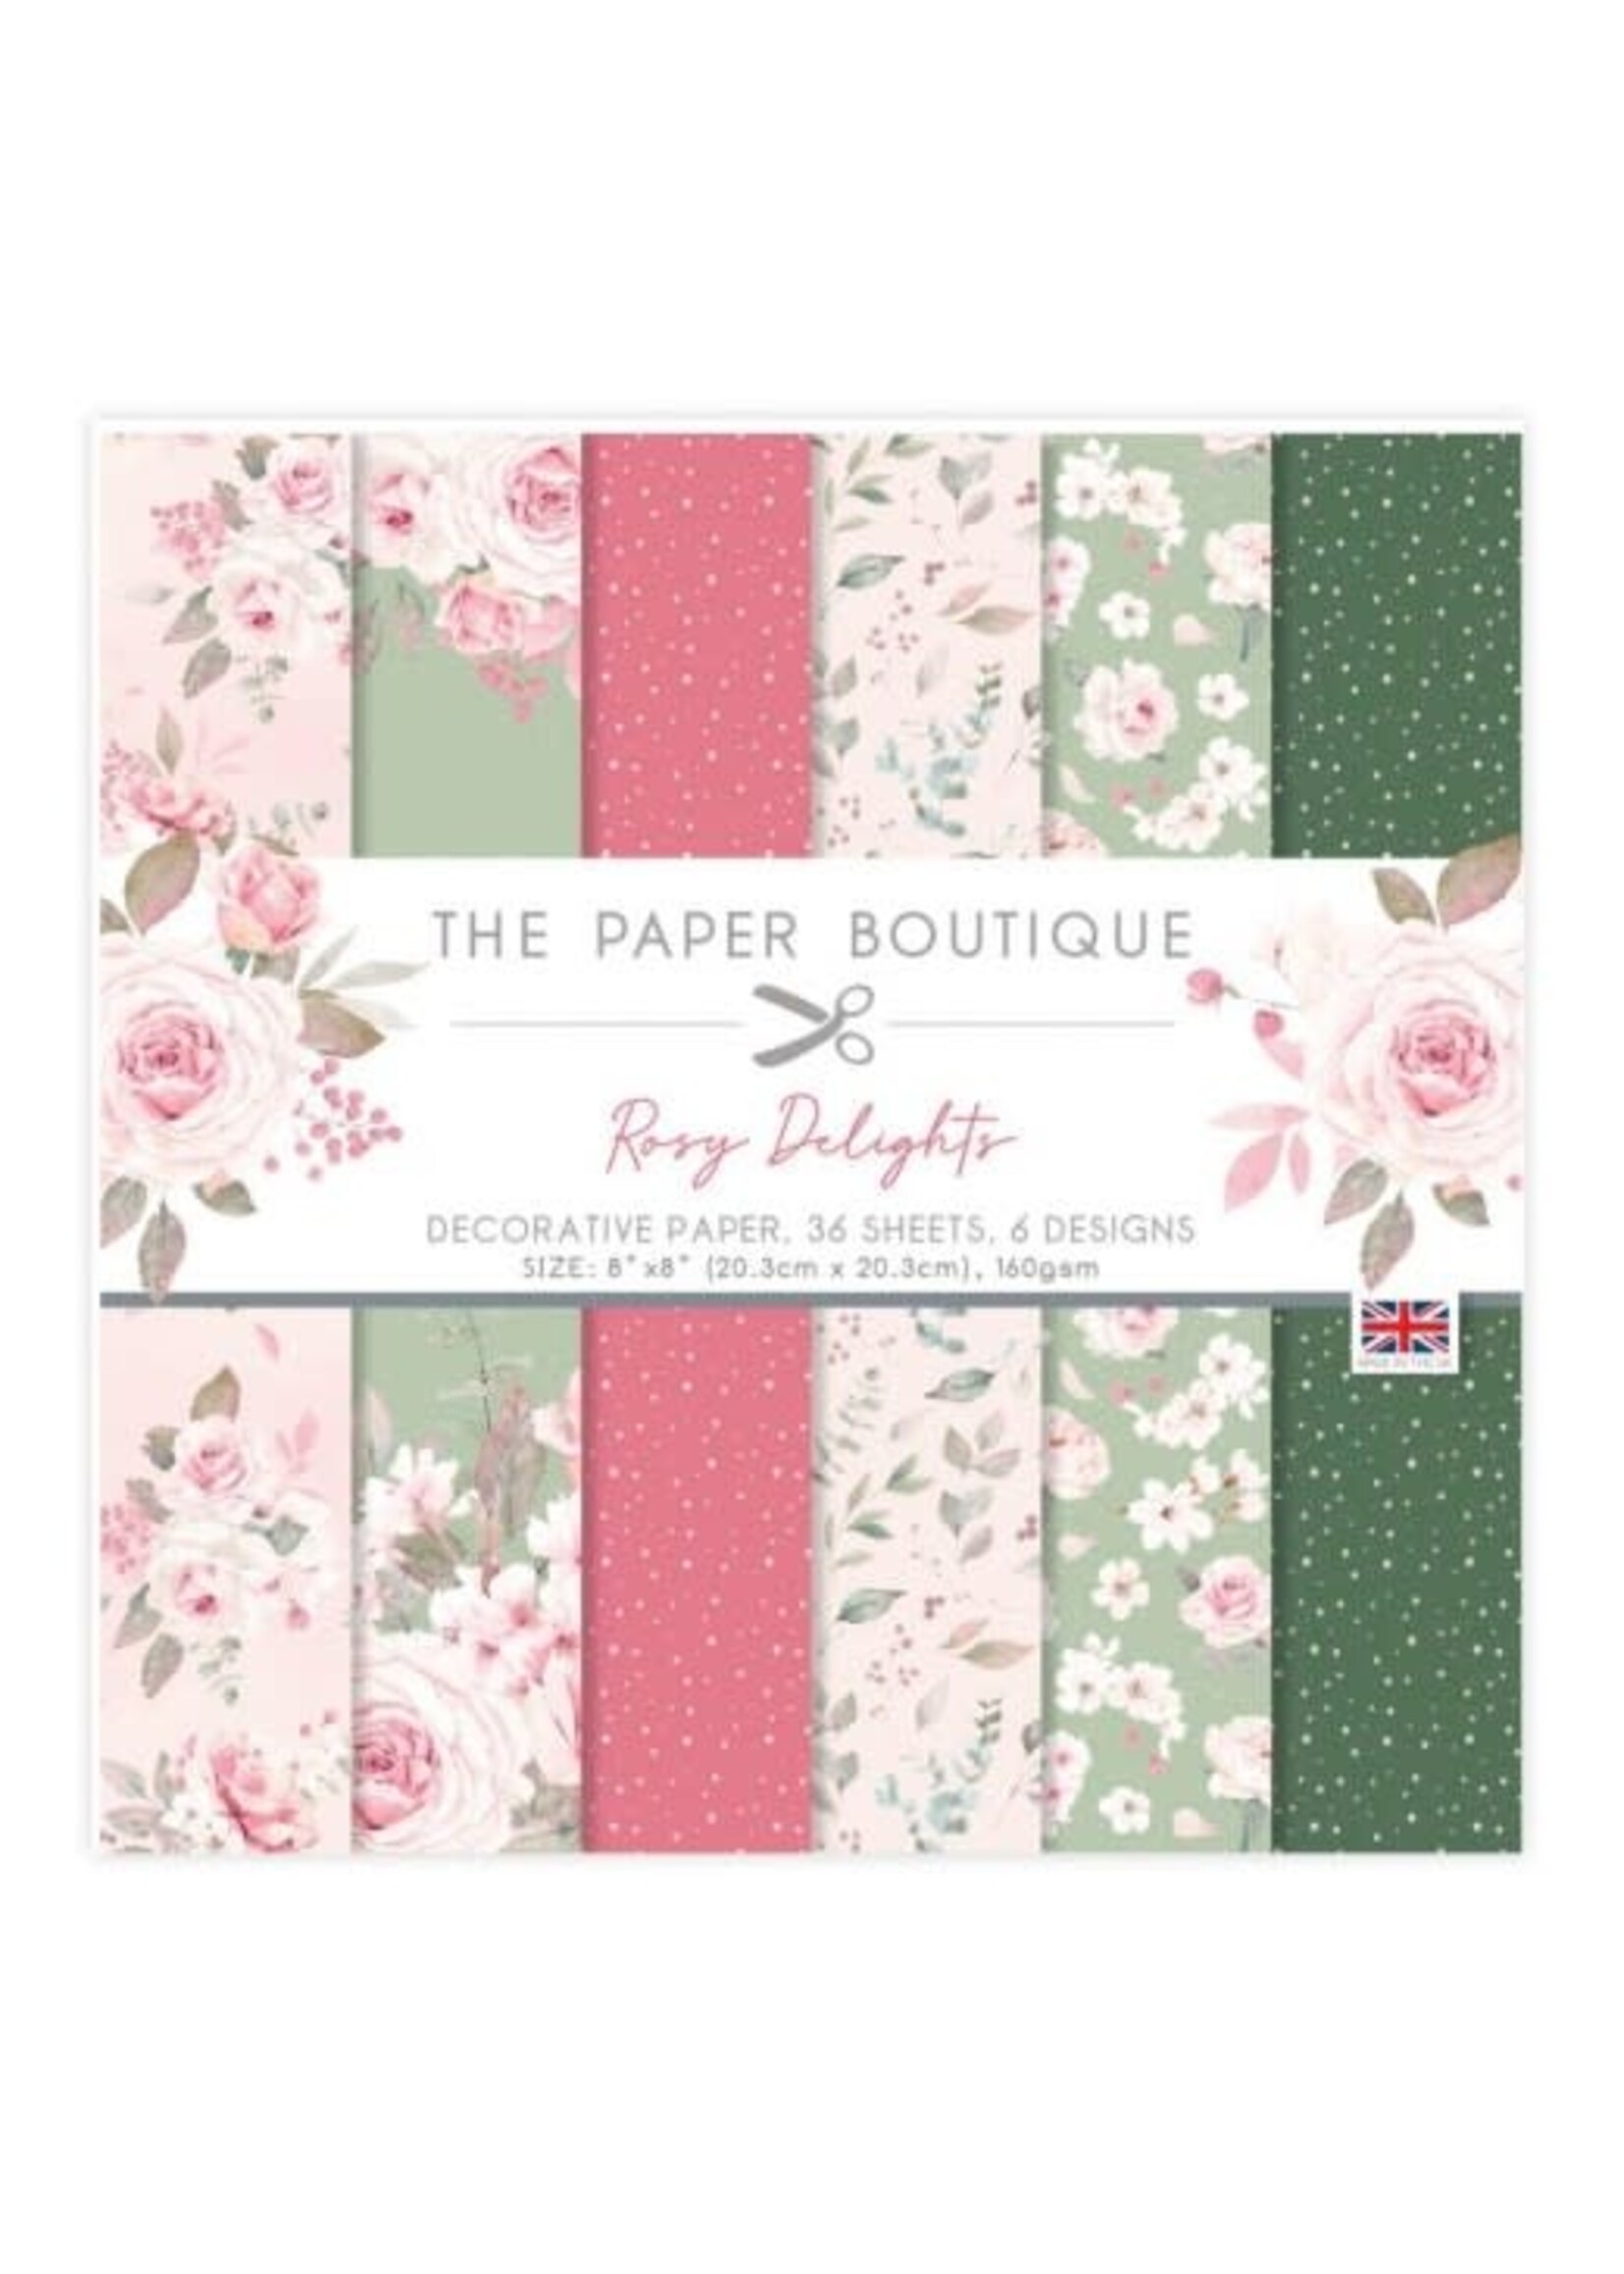 The Paper Boutique Rosy Deligths 8x8 Paper Pad